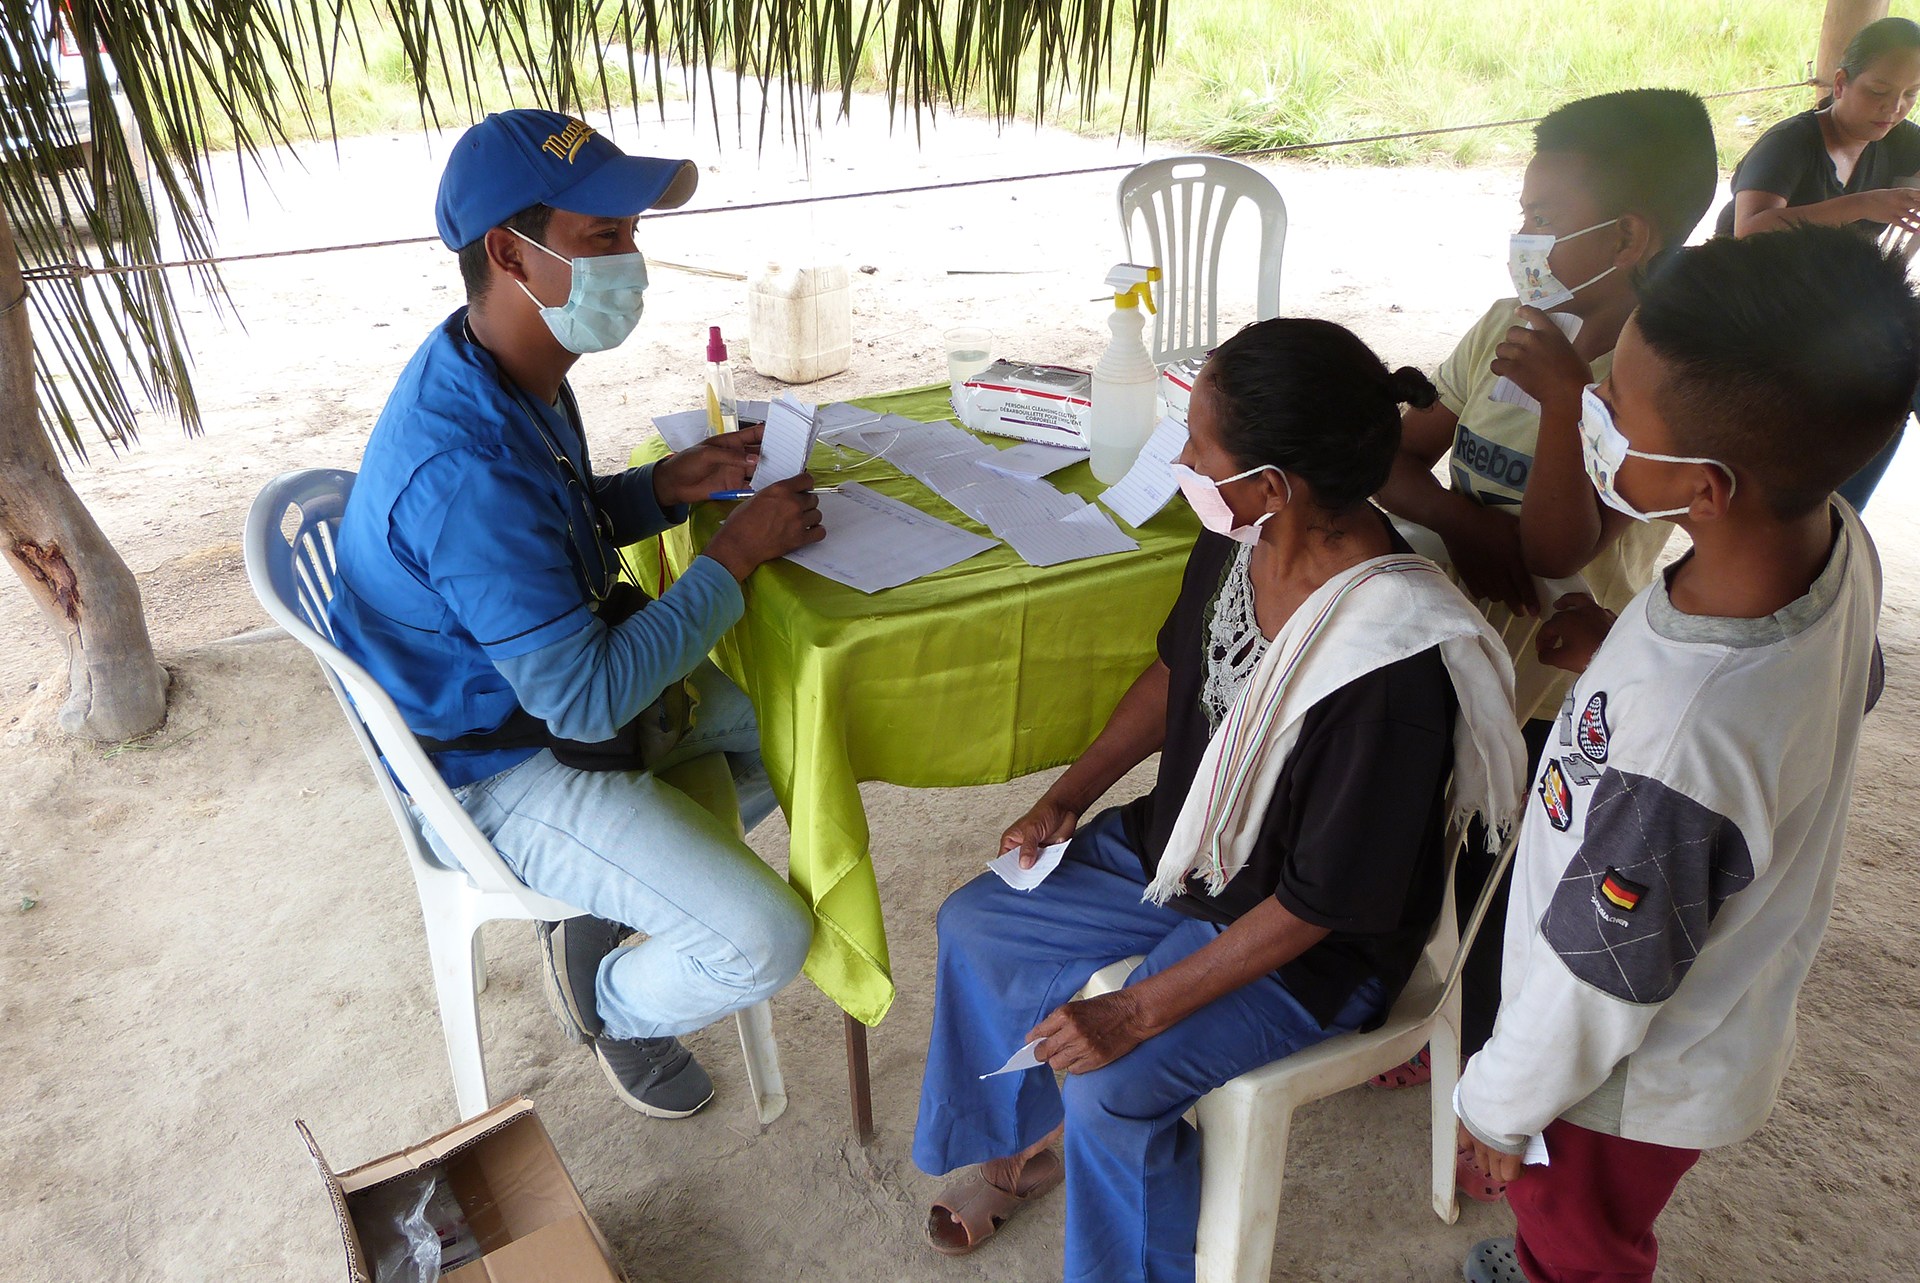 Medical mobile outreach activity completed under an LDS grant in the Bolivar state, Venezuela.